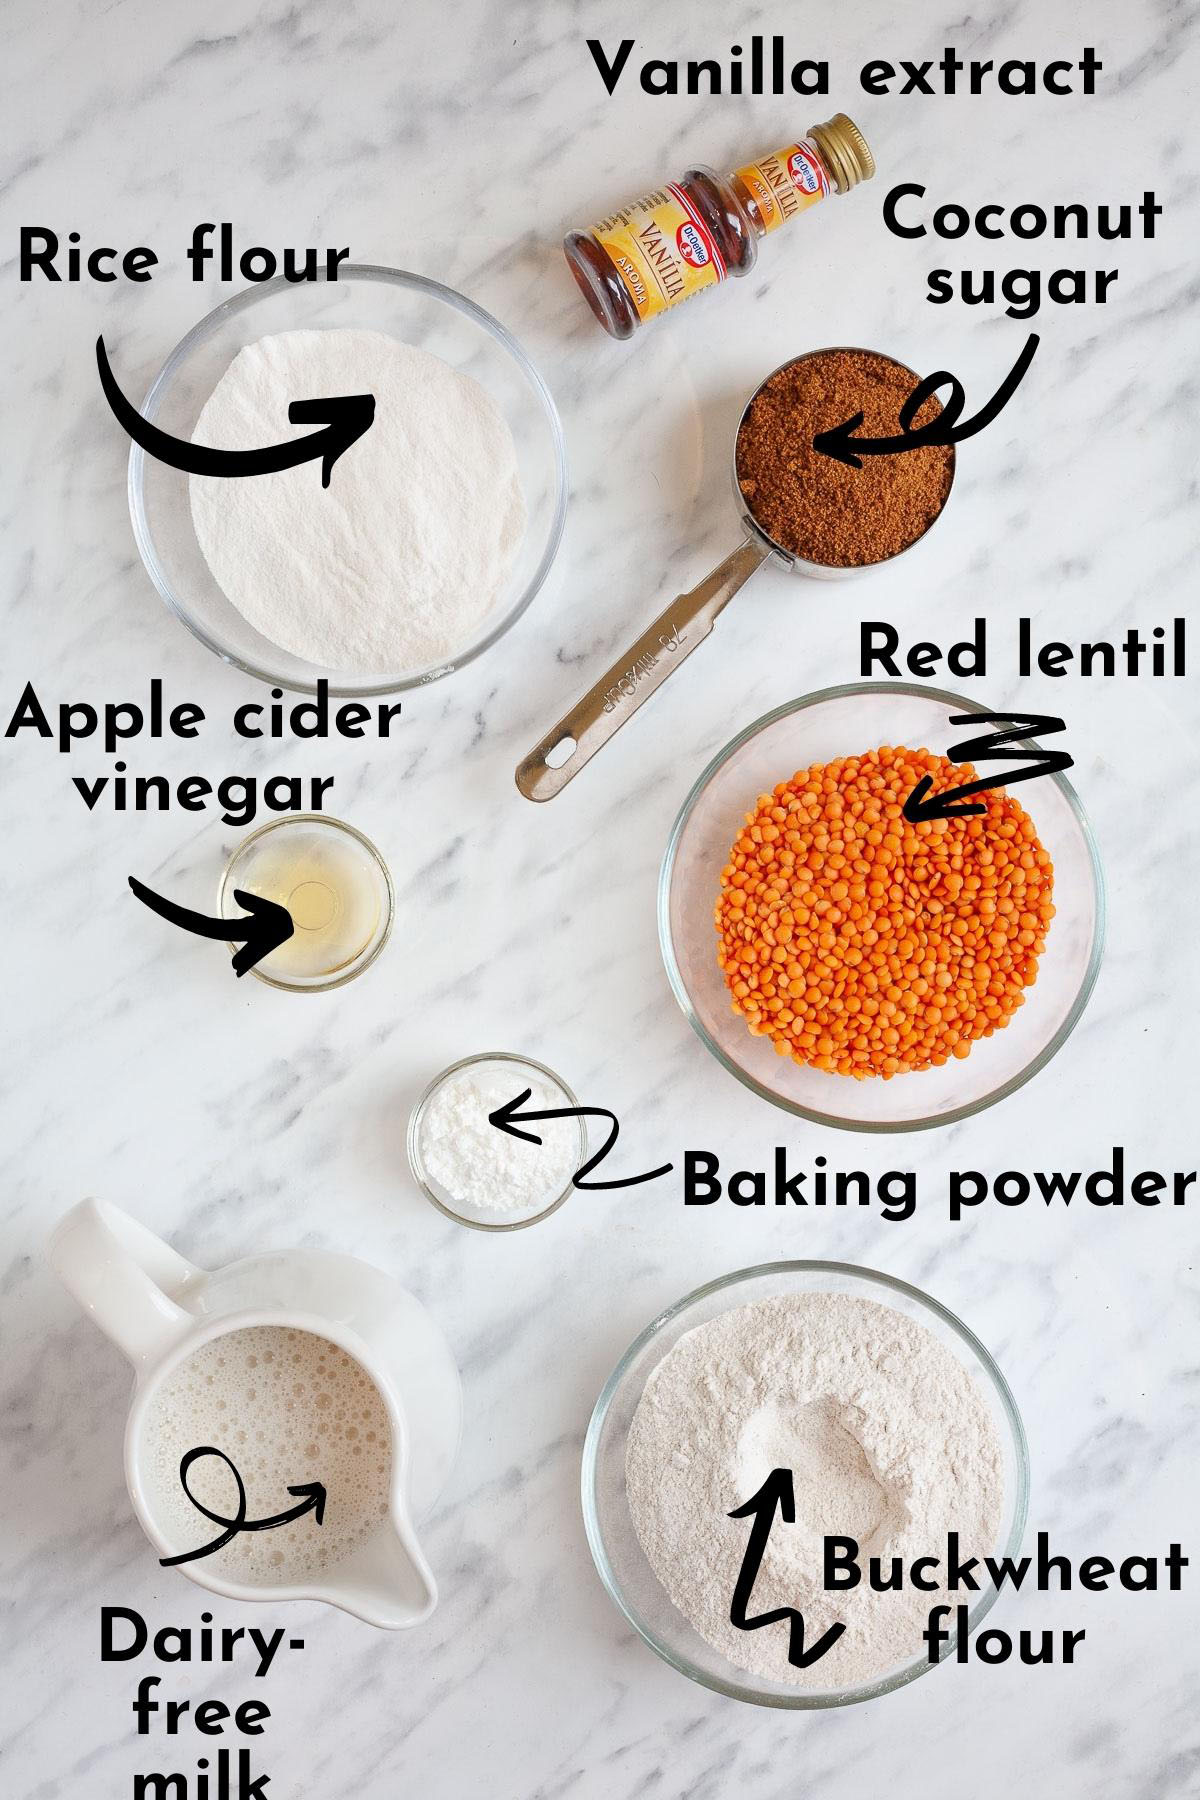 Ingredients for red lentil pancakes measured in glass bowls, white flours, powders, brown coconut sugar, milk in a jar, vanilla extract and of course red lentils